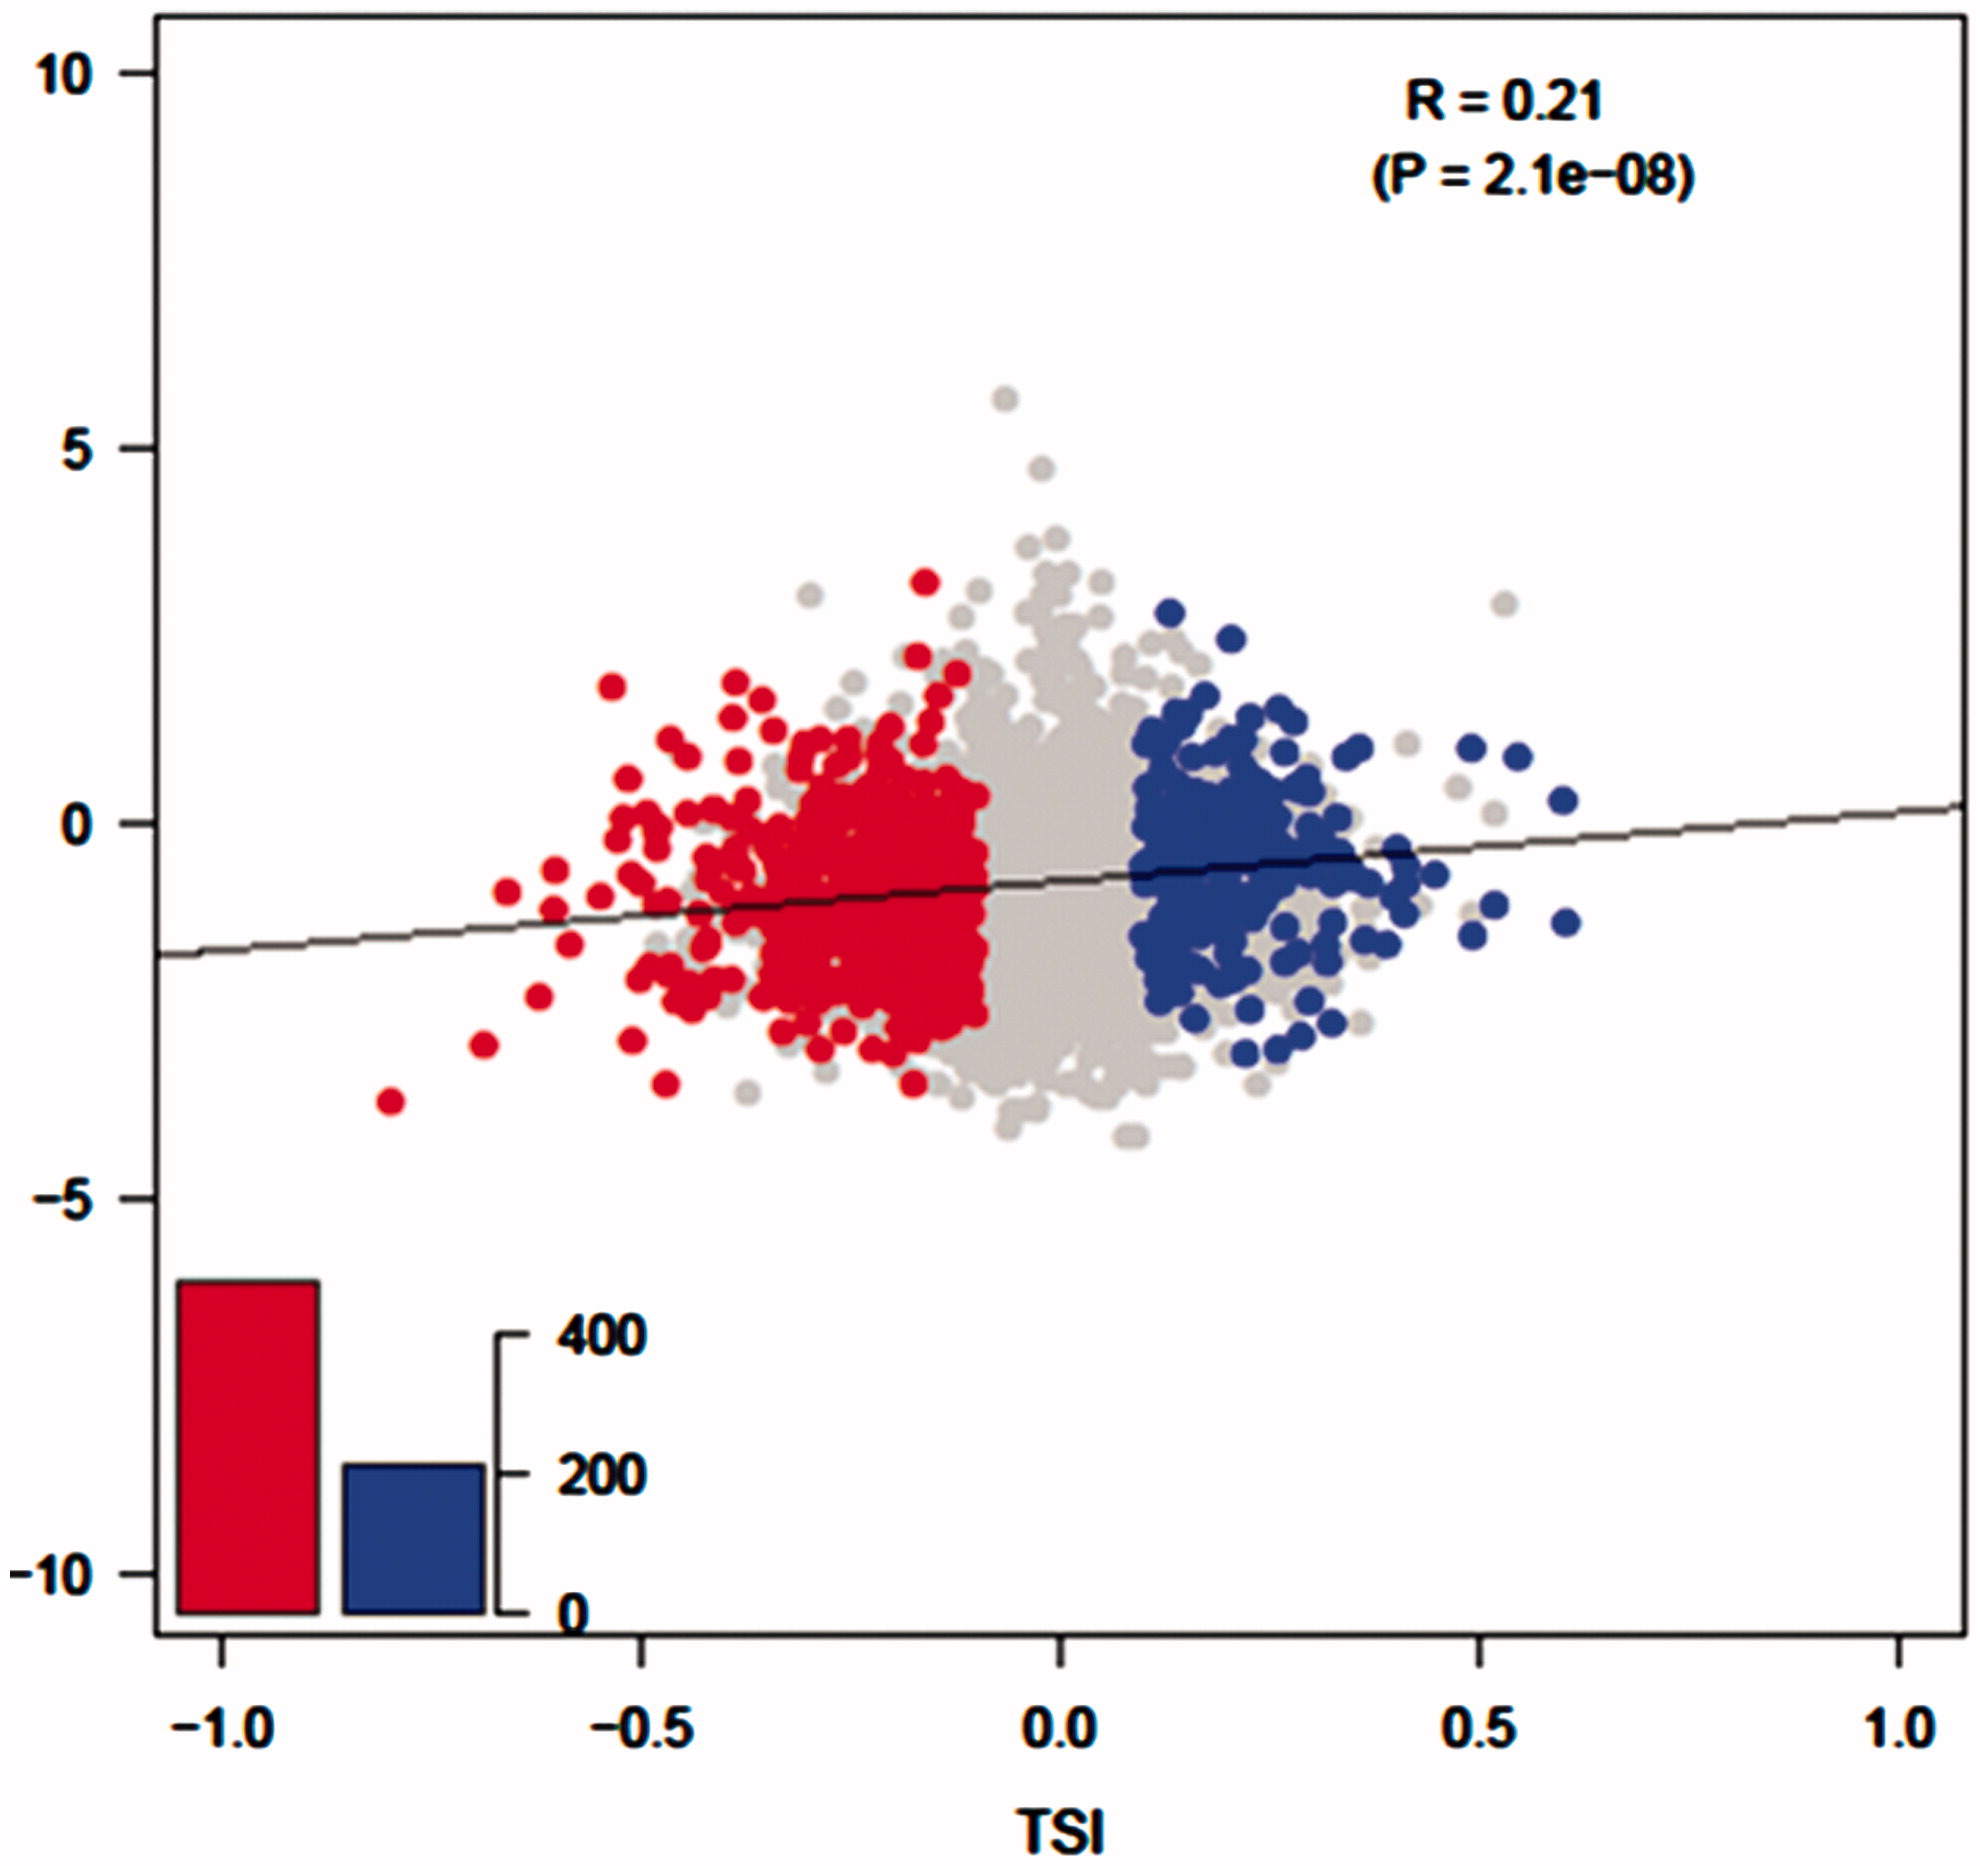 Figure 1. Uremic group vs control group 3′-UTR length polymorphism. The horizontal axis represents TSI. Genes have significant change in tandem 3′-UTRs lengths are (FDR < 0.01) marked out as points: genes using a lengthened 3′-UTR are on the right (TSI > 0), and genes using shortened 3′-UTR are on the left (TSI < 0). Y-axis represents the logarithm of the expression level of genes from the uremia sample relative to the normal sample.